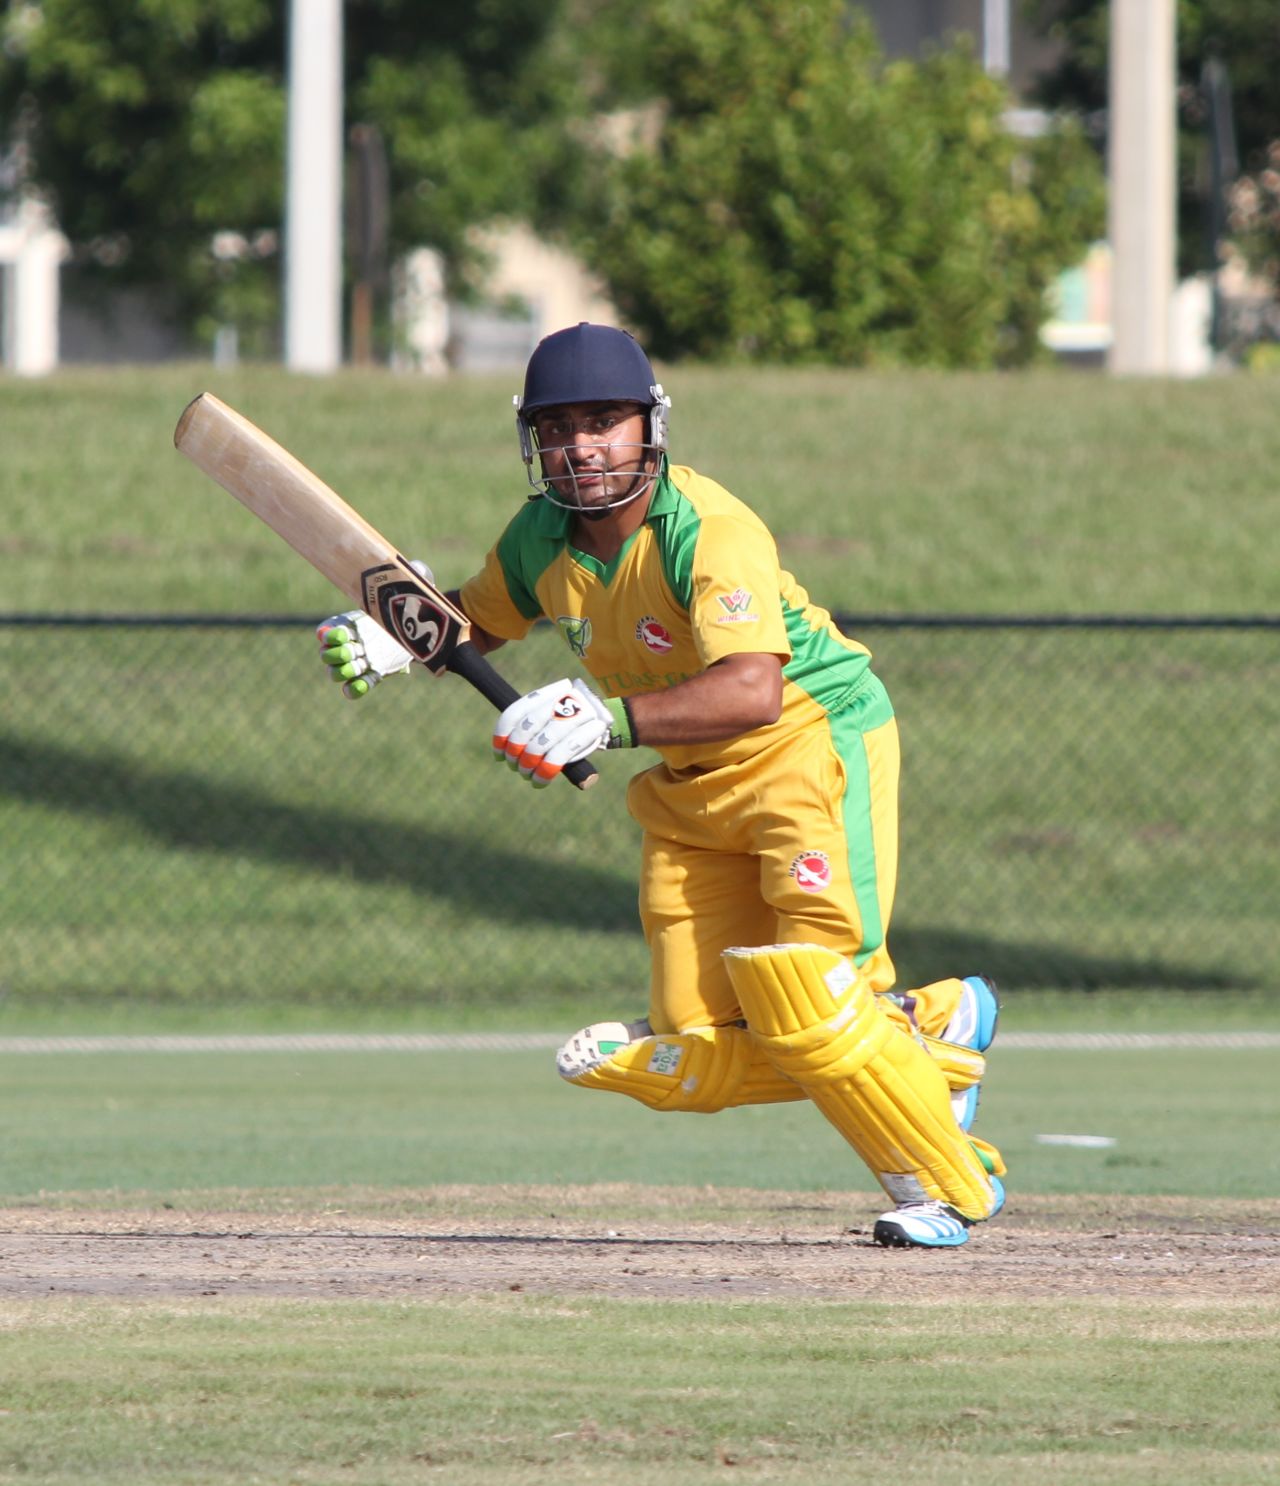 Nisarg Patel sets off for a run, New York v South West, USACA T20 National Championship, Lauderhill, August 16, 2014